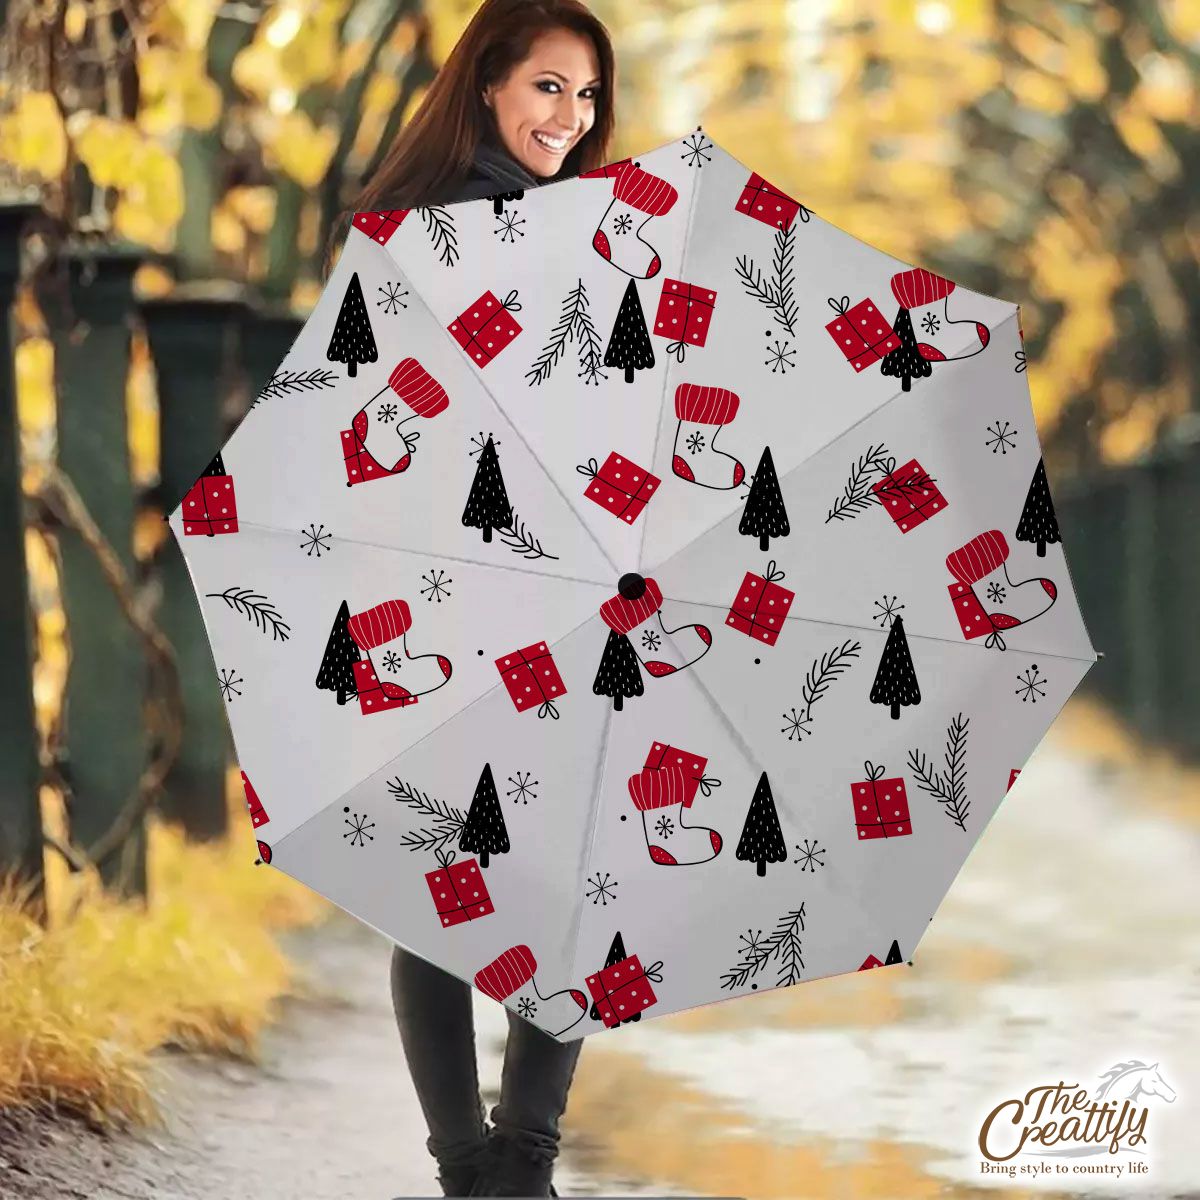 Hand Drawn Red Socks, Christmas Gifts, Pine Tree Silhouette And Snowflake Clipart Seamless White Pattern Umbrella